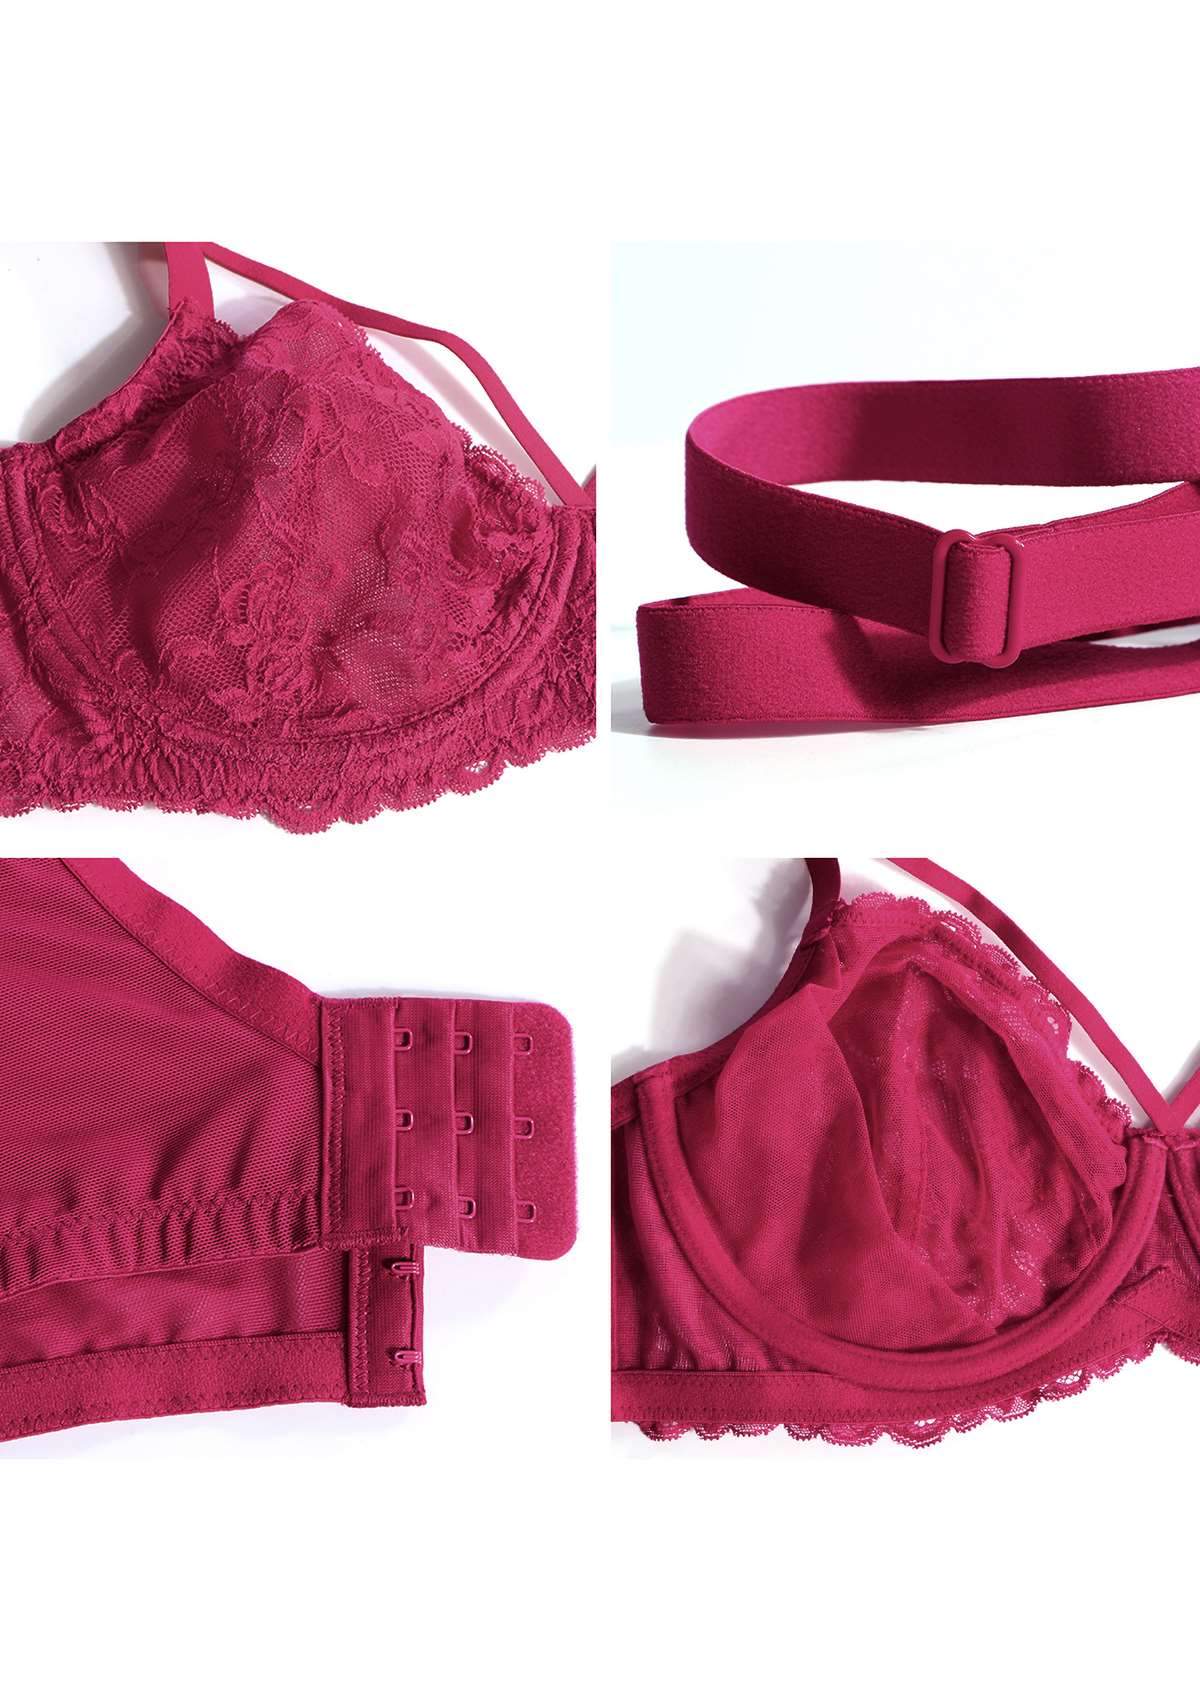 HSIA Pretty In Petals Sexy Lace Bra: Full Coverage Back Smoothing Bra - Red / 46 / I